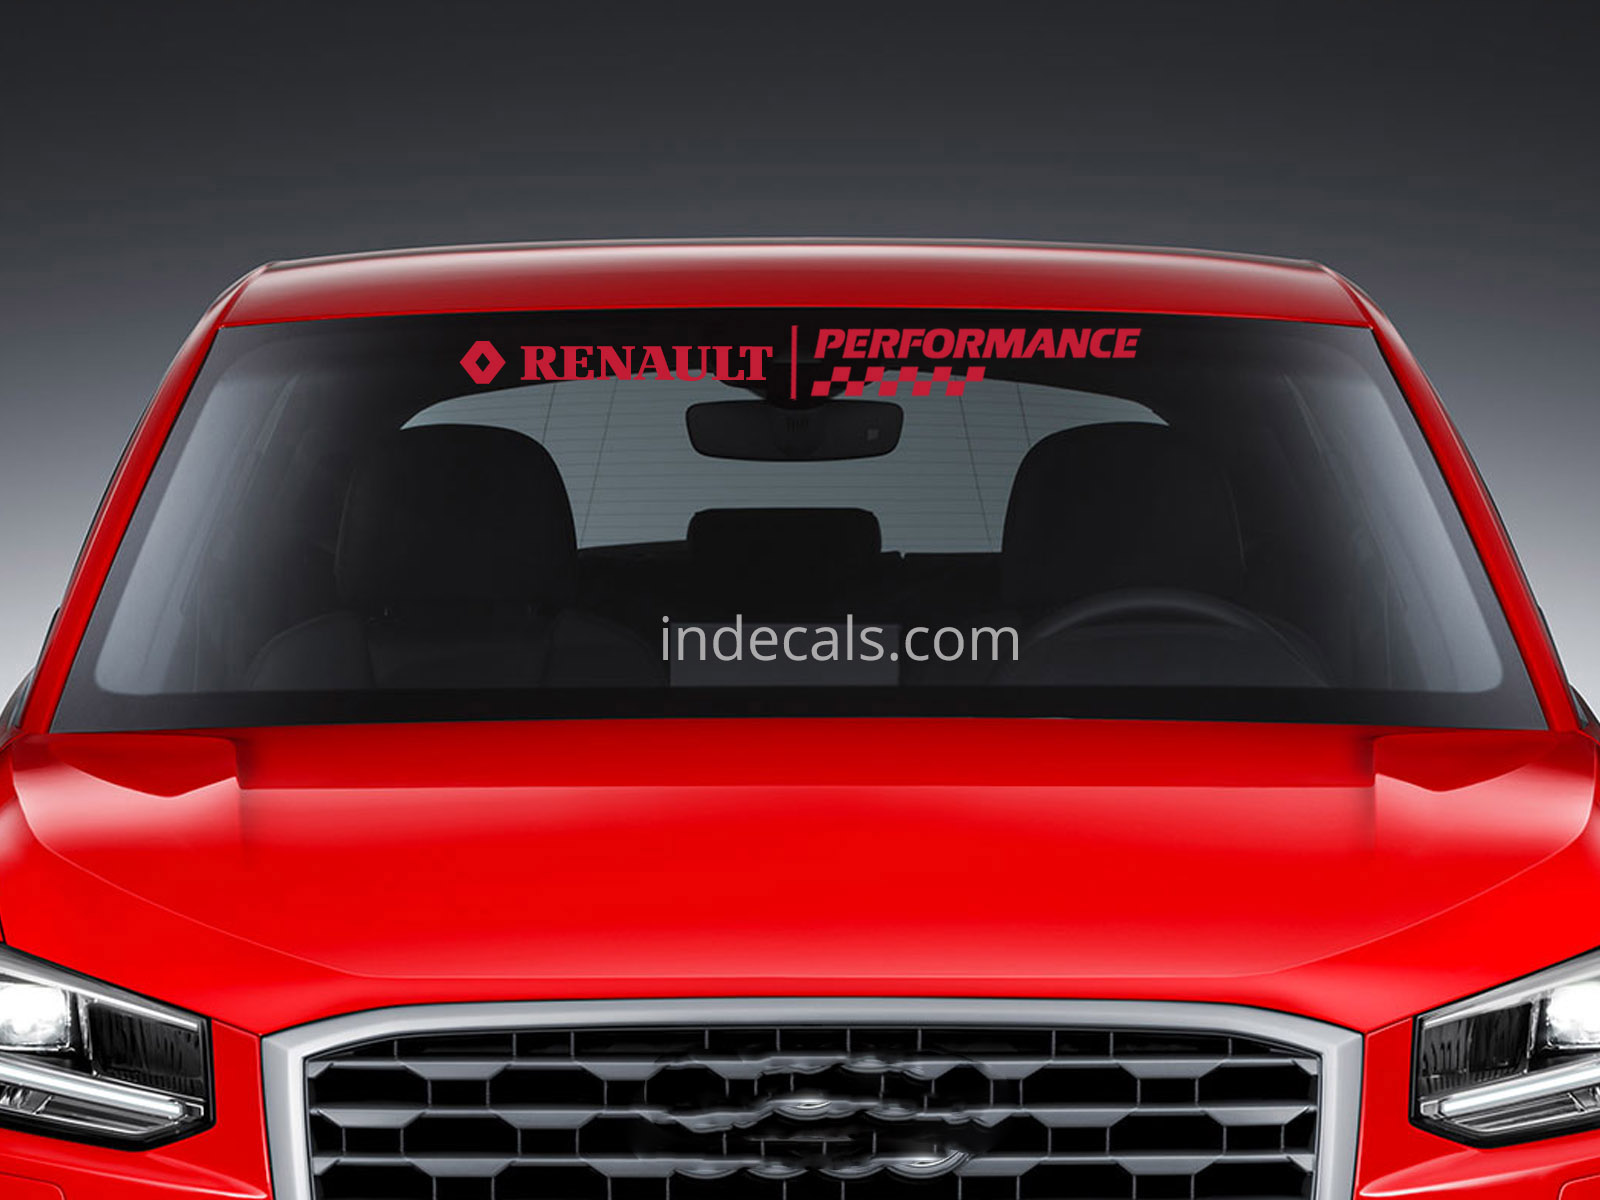 1 x Renault Performance Sticker for Windshield or Back Window - Red